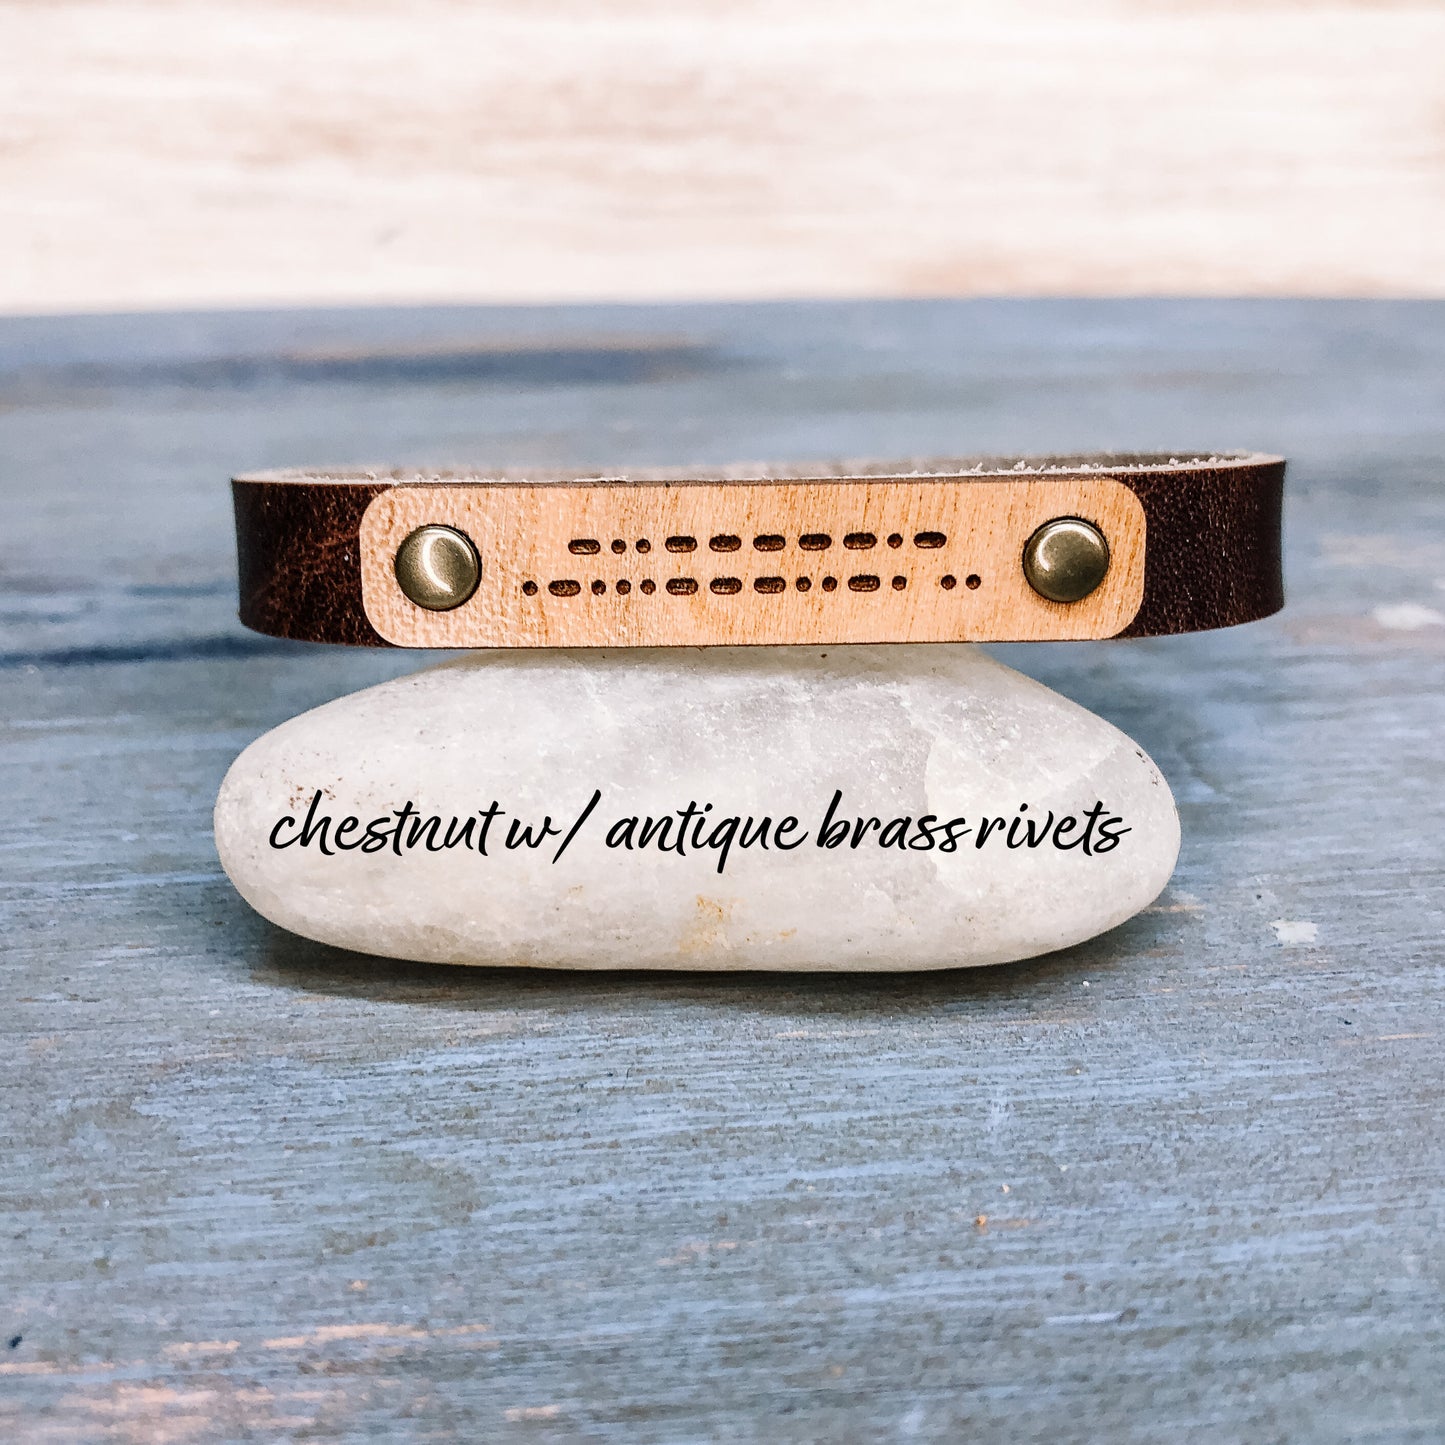 Personalized Leather Bracelet for Him -  Engraved Leather for Her - Custom Unisex Leather Cuff -  Christmas Gift - Morse Code